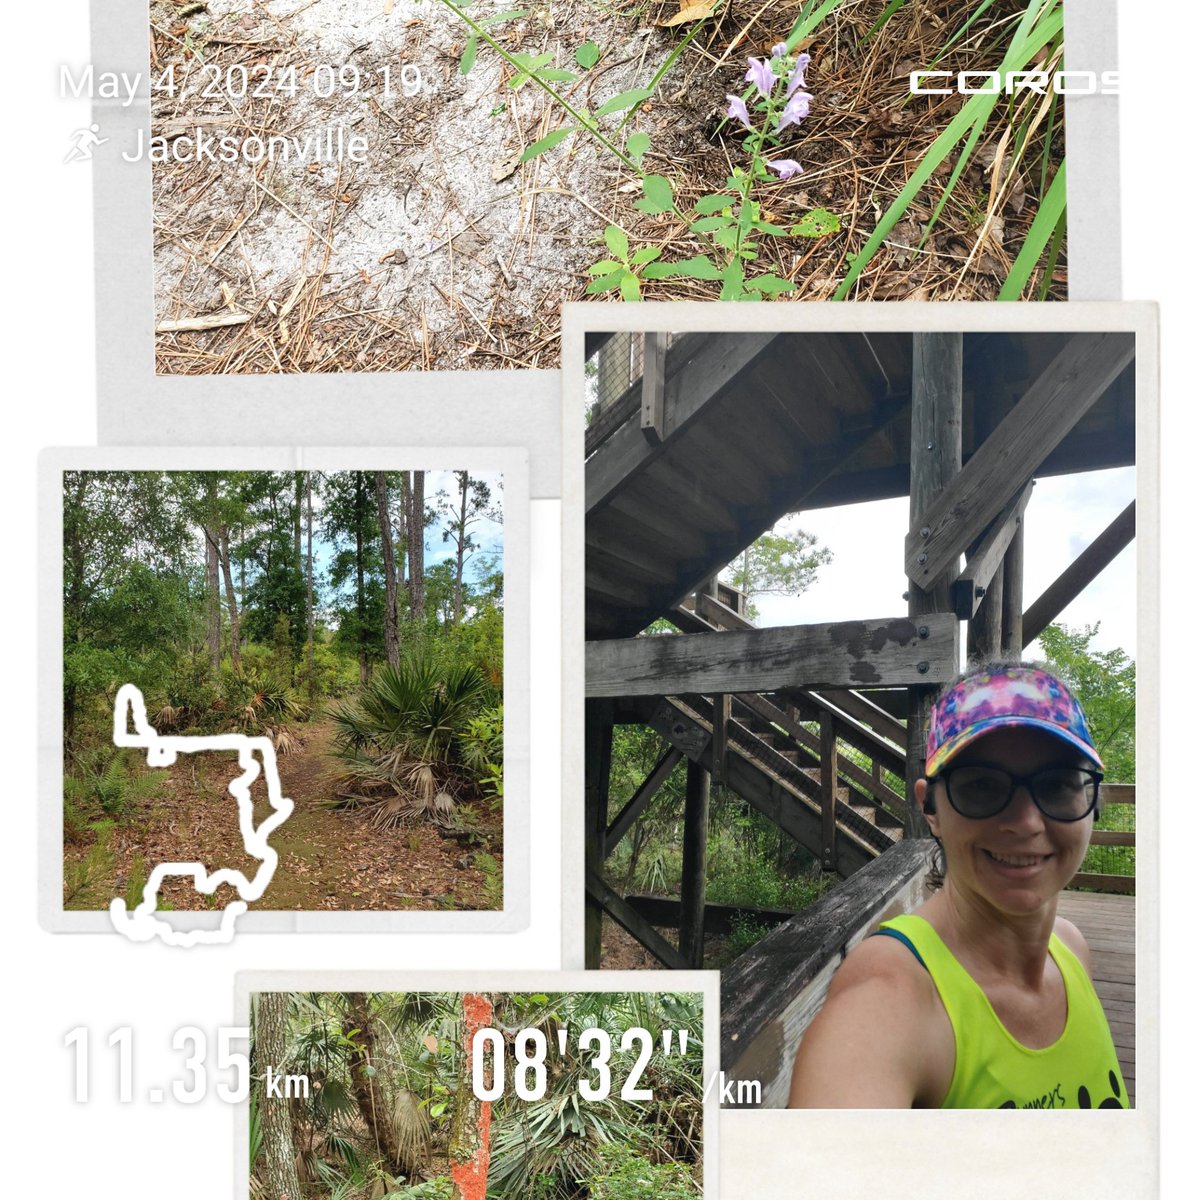 Had a great time on my favorite trail today training for the Stone Stairs of Death Race! 12 x 1/3 mile loops with 26 stairs included, then the long way out along the full trail. Have a beautiful day @runningpunks & all my friends ❤️ 🌼